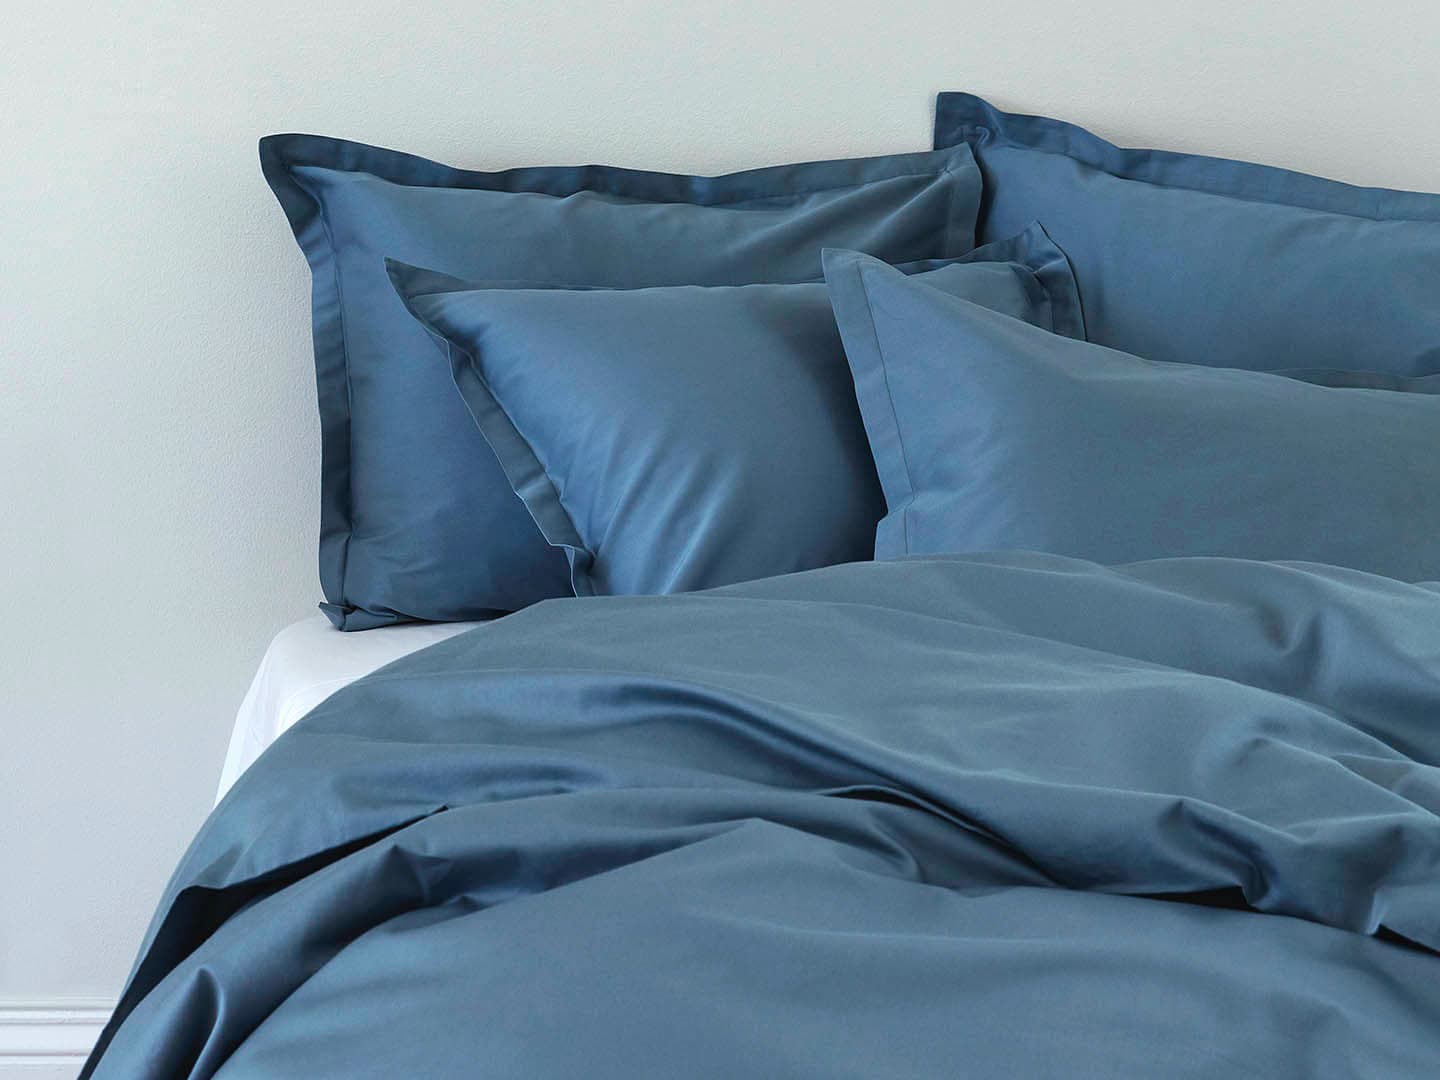 How to Choose the best Duvet Cover